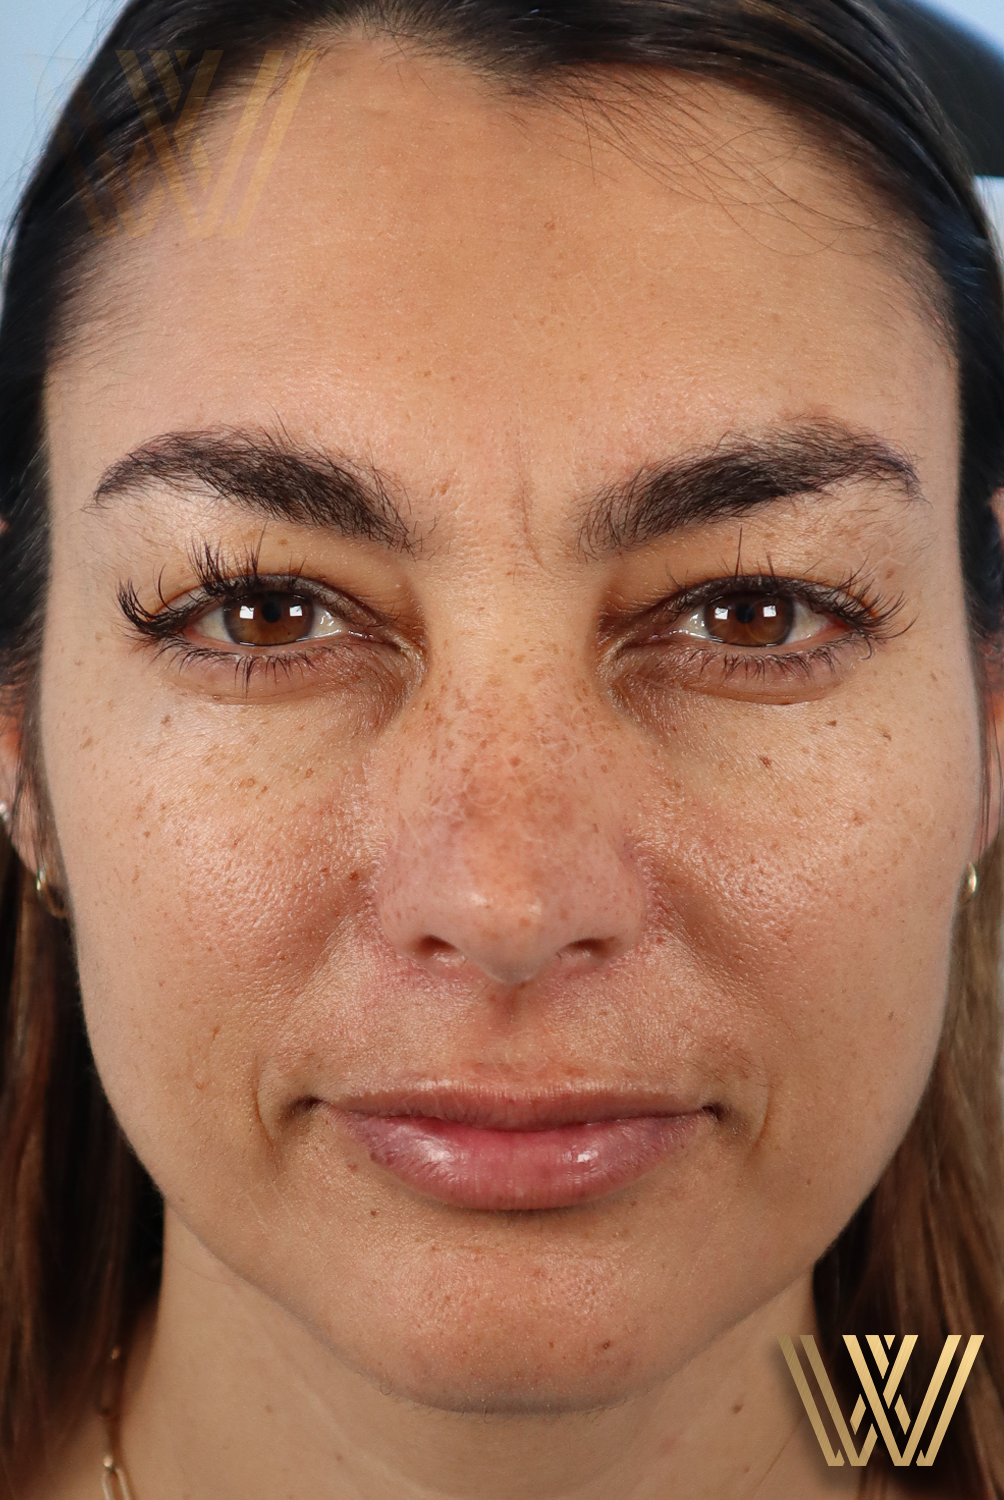 Client 3's face before Windermere Medical Spa's MK Beautification, the ultimate filler glow-up in Orlando.